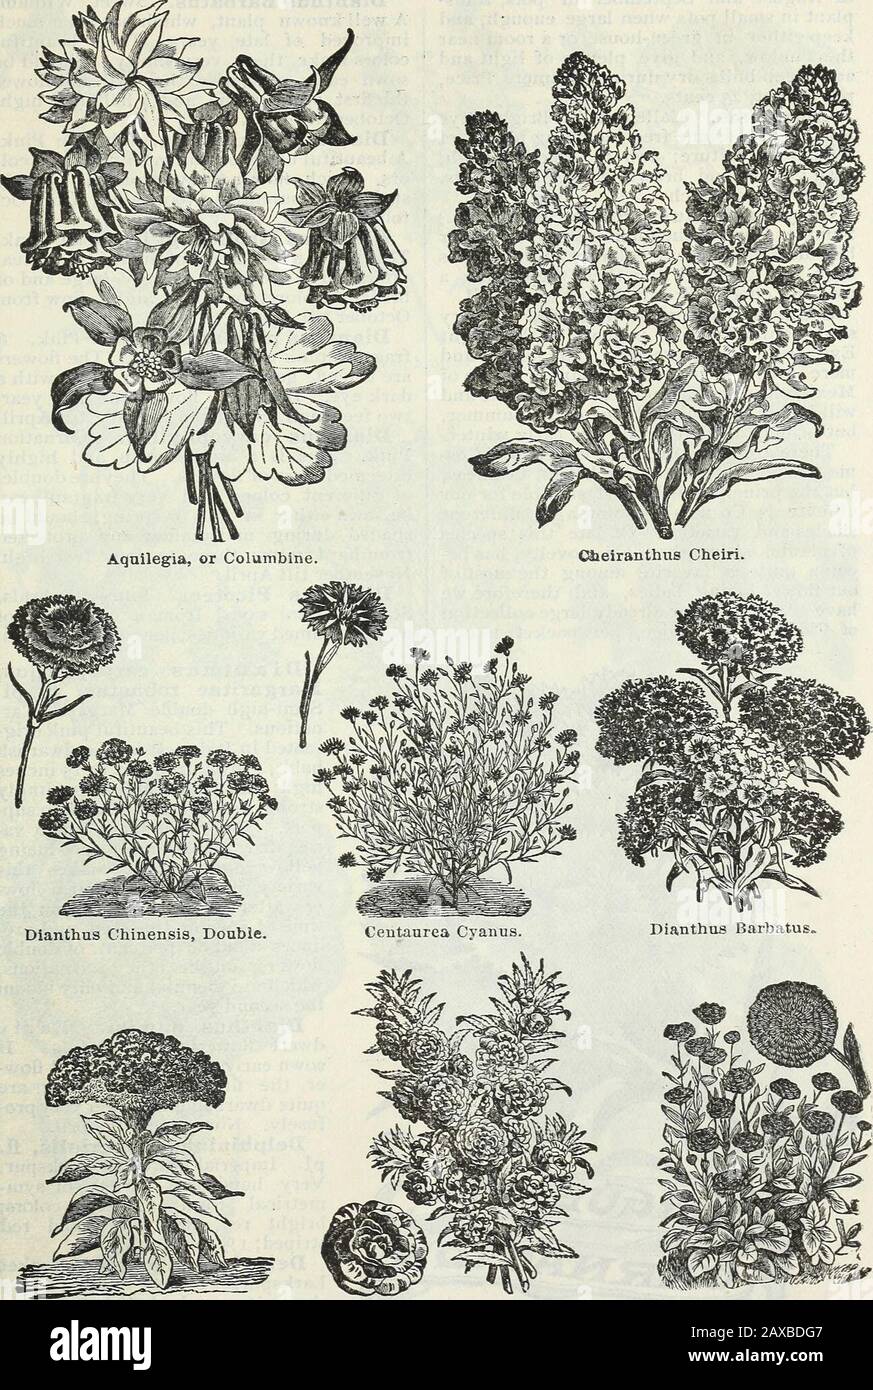 Steckler's seed catalogue and garden manual for the southern states : 1902 . bri Japan Clover is ths only southern clover planted from March to April GARDEN MANUAL FOR THE SOUTHERN STATES. 185. Celosia Cristata. Balsamina Camelia-Flowered. Calendula Officinalis. Budded .tecan Titee is a sure inyesunent. 206 J. STKCKLER SEED CO., LTD., ALMANAC AND m August and September in pots, trans-plant in small pots when large euough, andkeep either in green-house or a room nearthe Window, and give plenty of light andair. Keep bulbs dry during summer. Price,per packet, 25 cents. Correopsis. (Calleopsis.) B Stock Photo